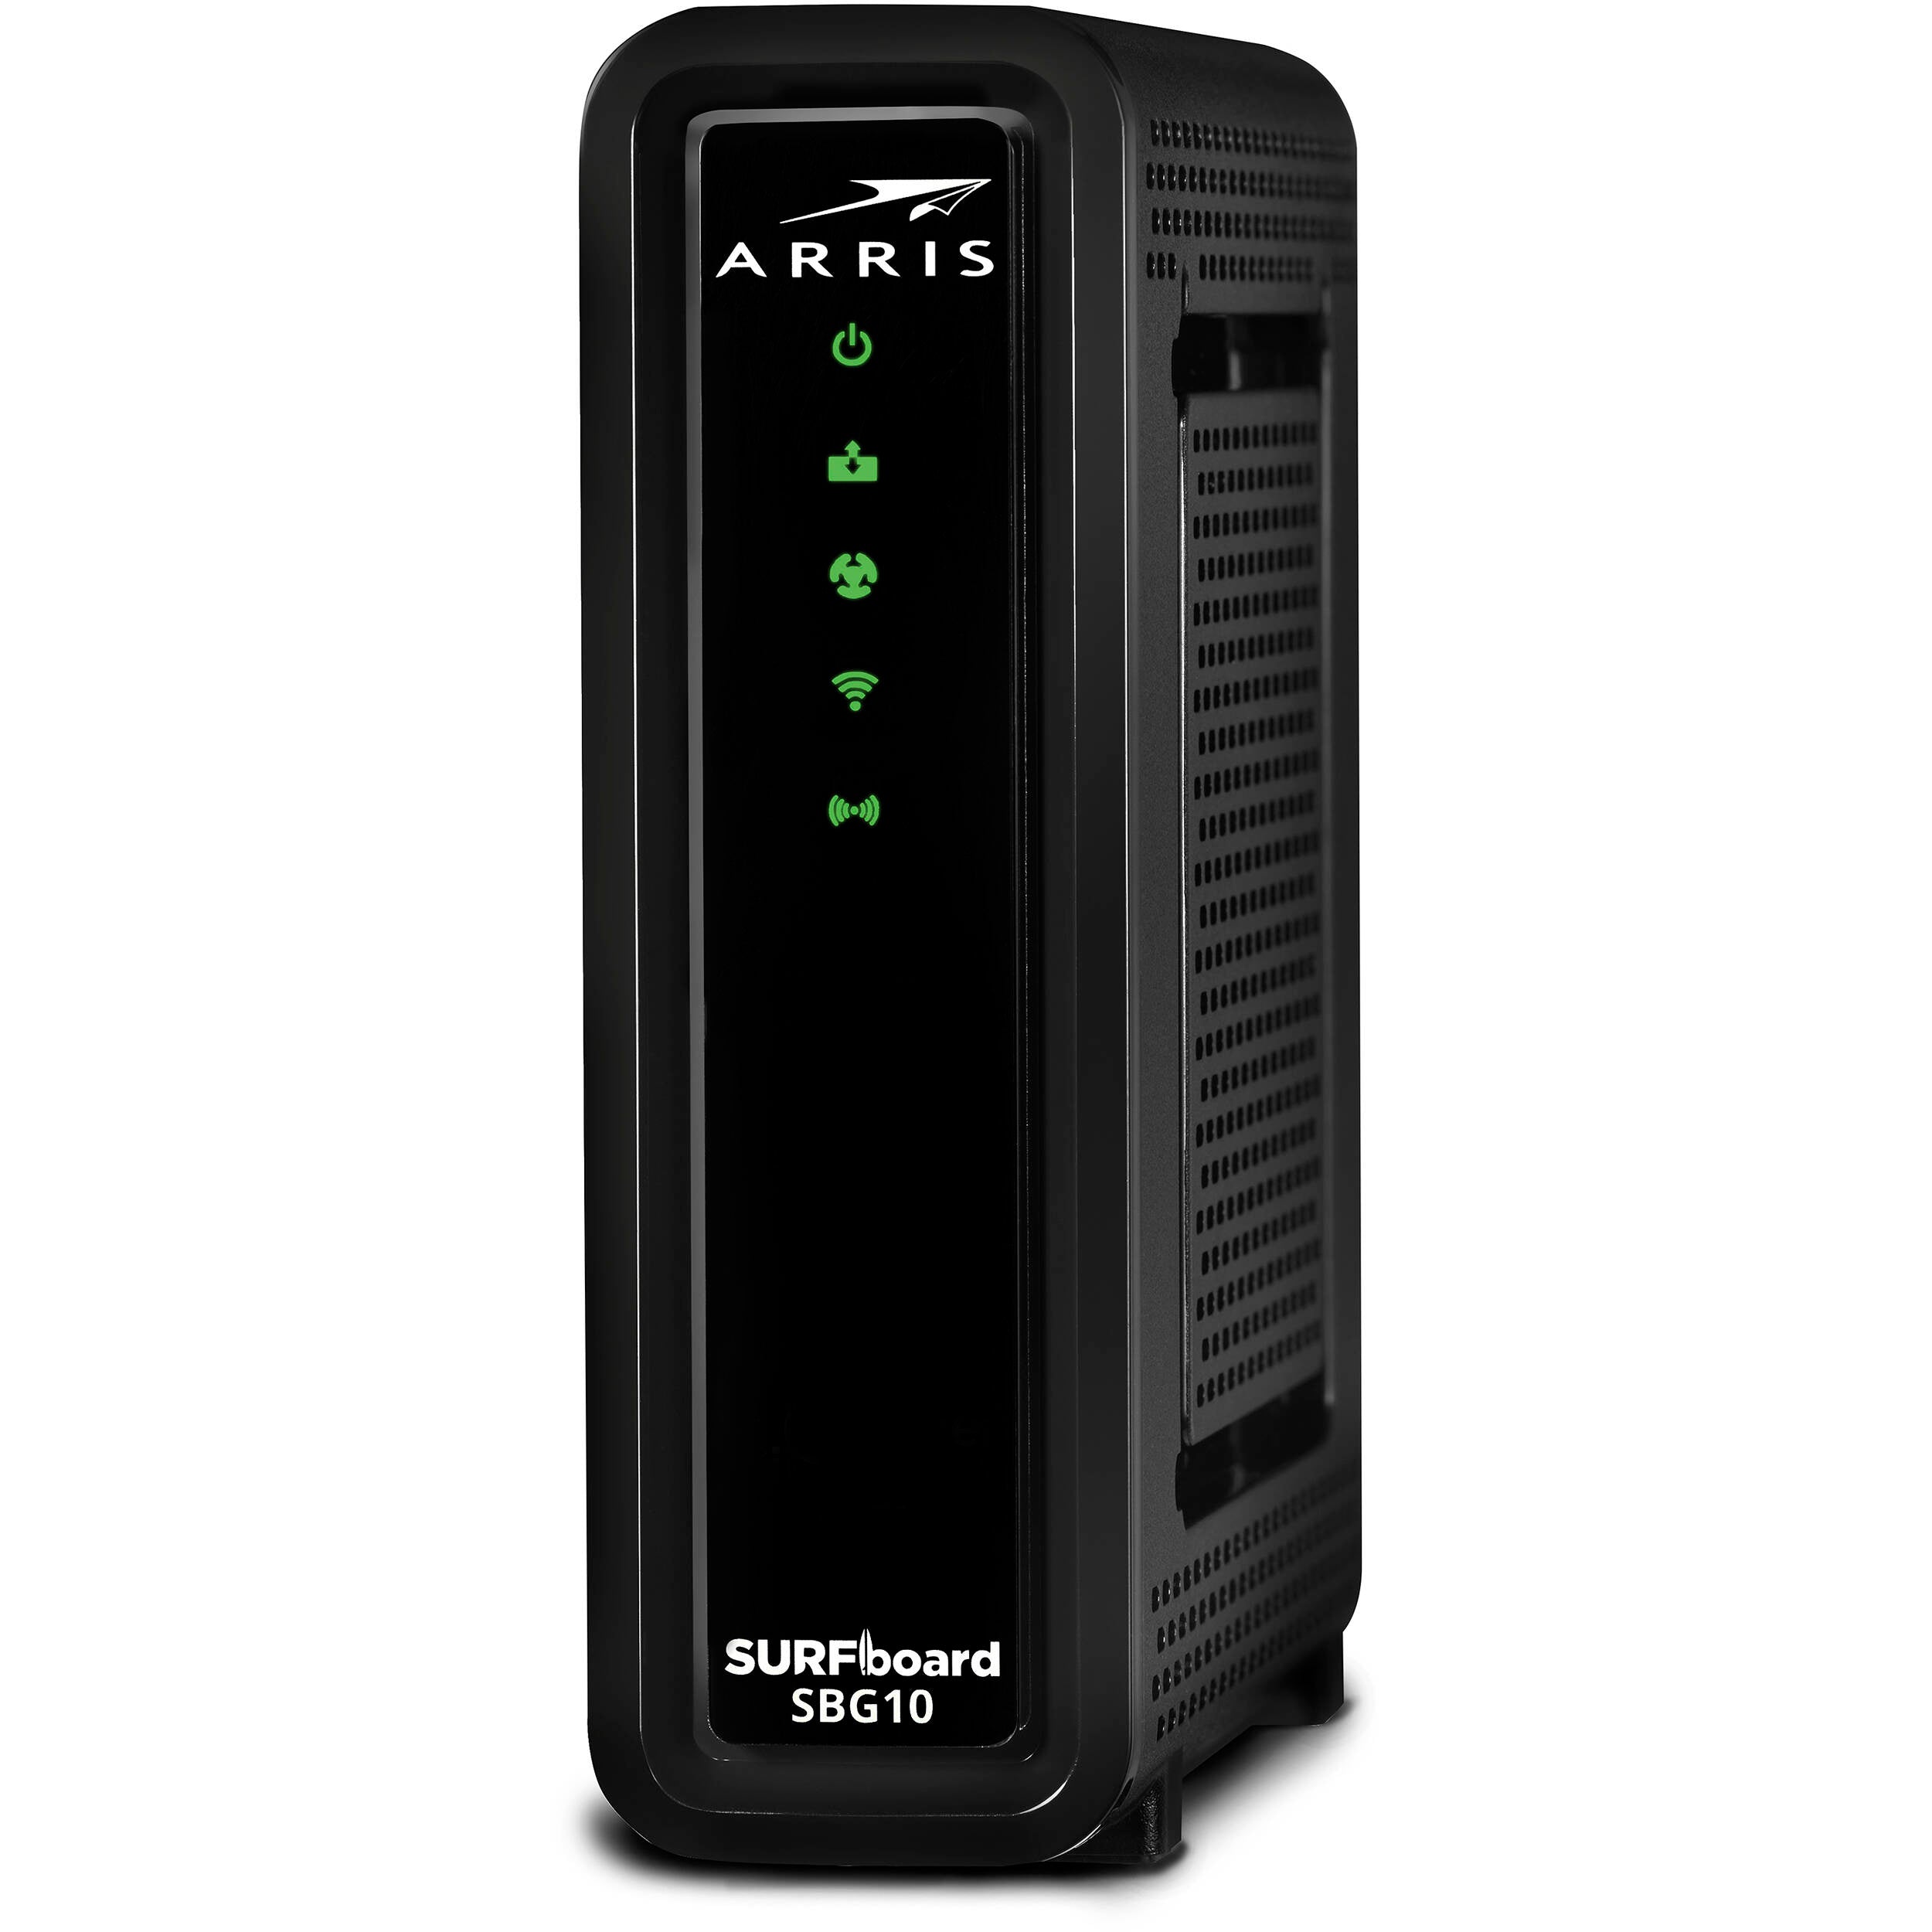 ARRIS SURFboard SBG10-RB DOCSIS 3.0 16 x 4 Gigabit Cable Modem & AC1600 Wi-Fi Router - Certified Refurbished